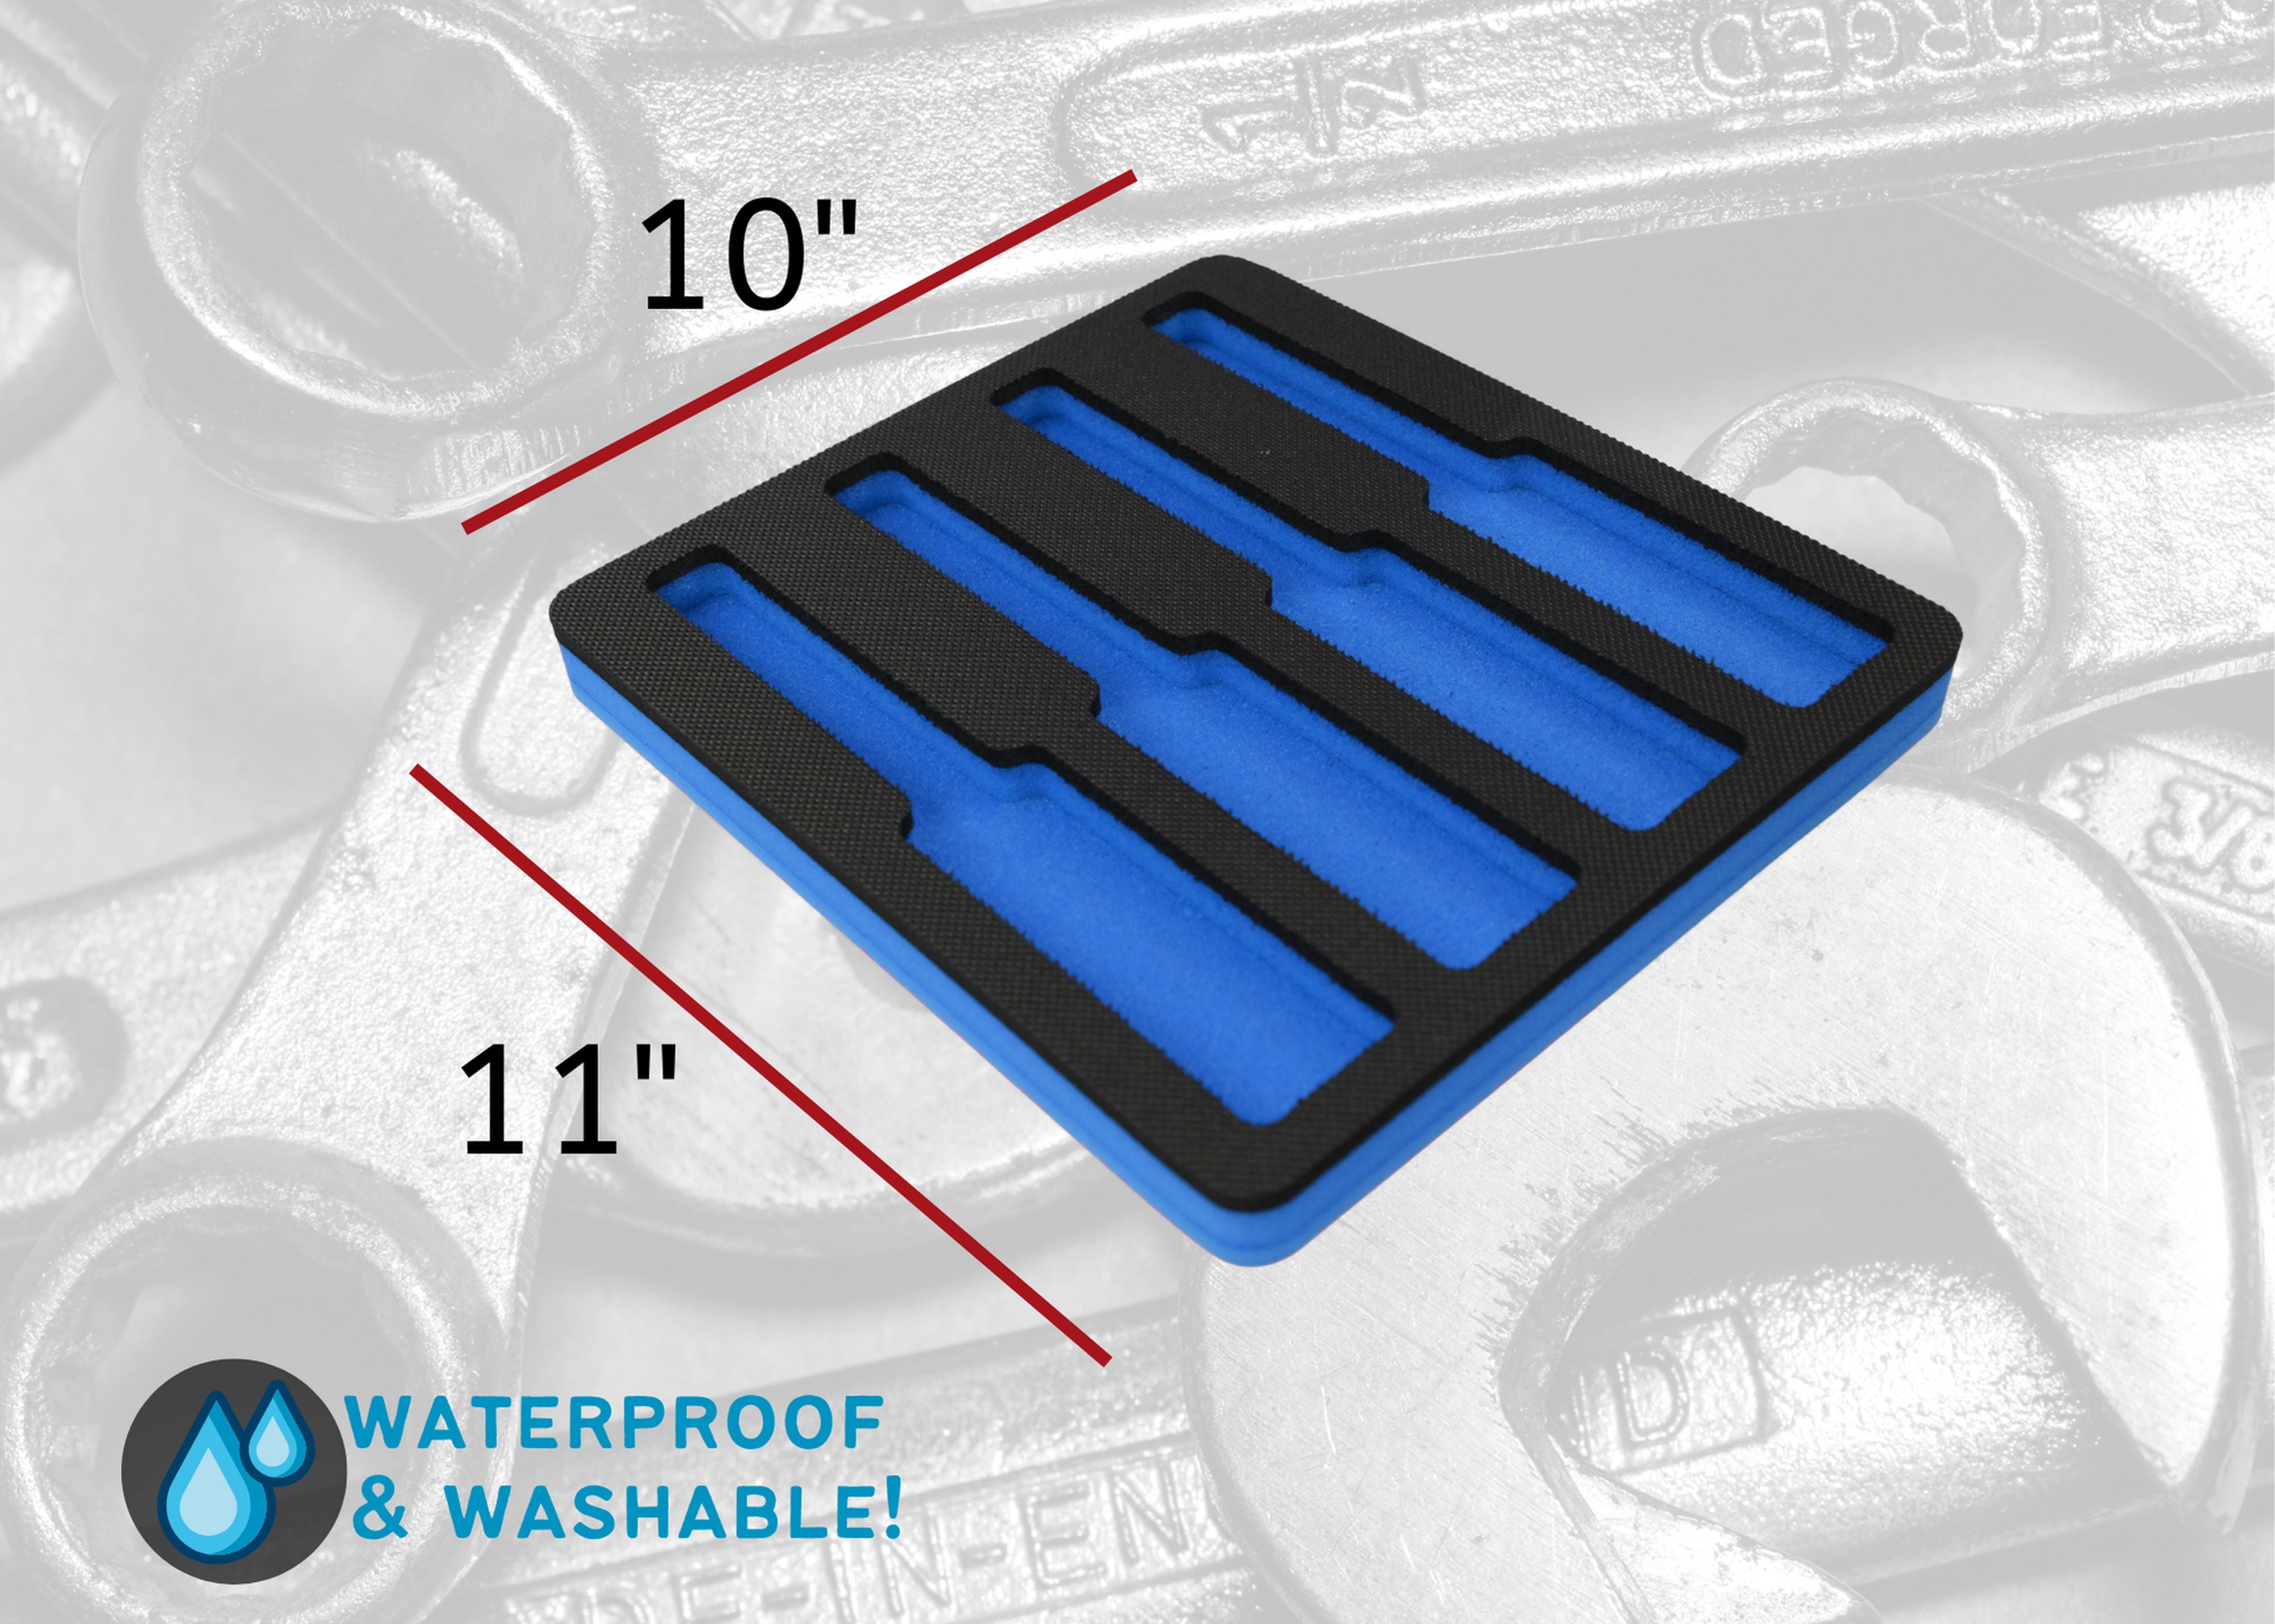 Tool Drawer Organizer Screwdriver Holder Insert Blue Black Durable Foam Tray Holds 4 Drivers Up To 10 Inches Fits Craftsman Husky Kobalt Milwaukee Many Others